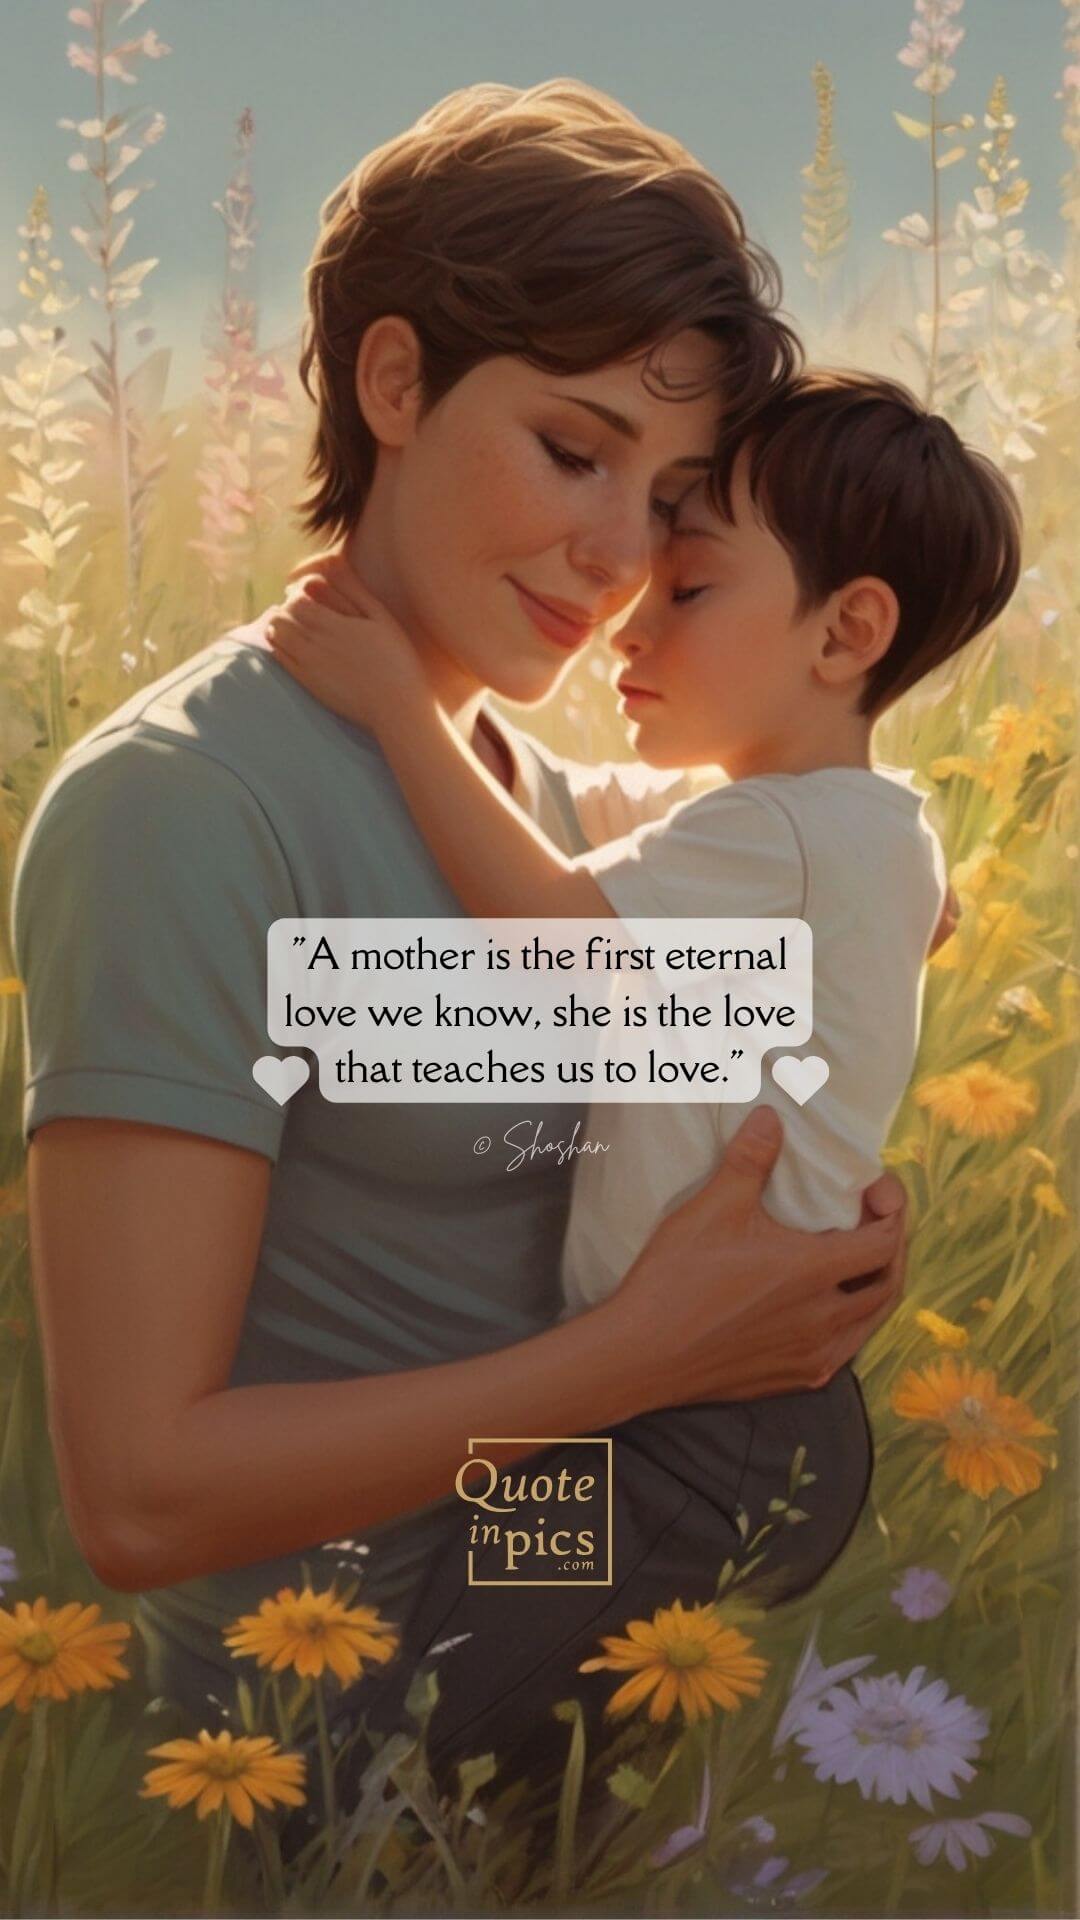 A mother is the first eternal love we know, she is the love that teaches us to love.